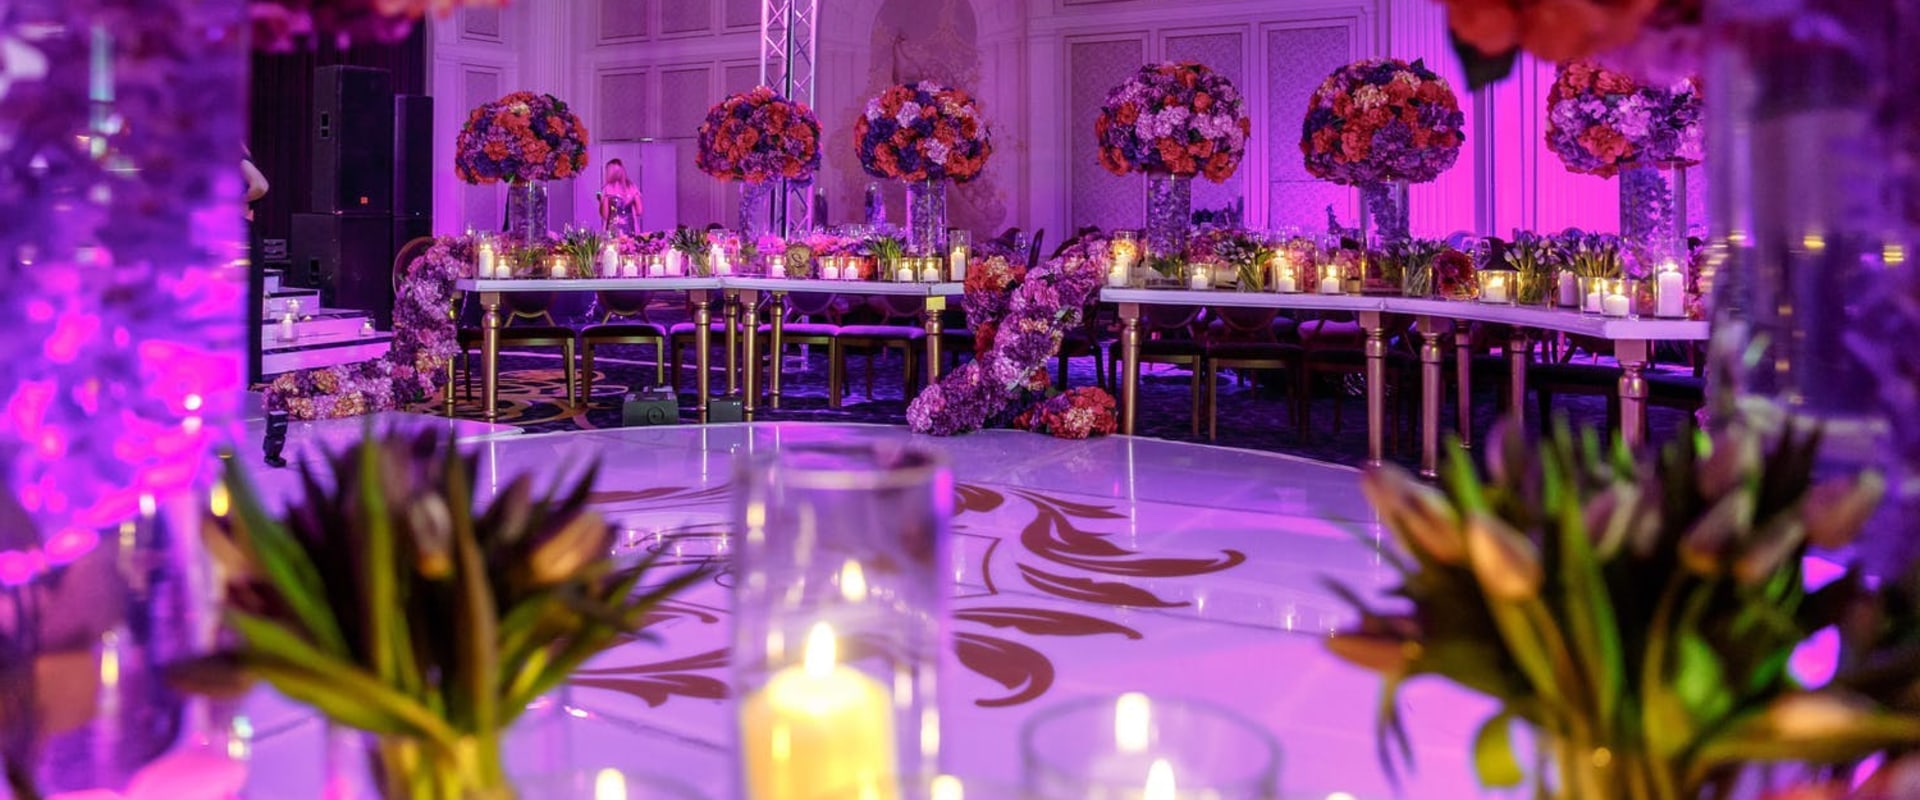 The Ins and Outs of Decorations at Function Halls in Orange County, CA